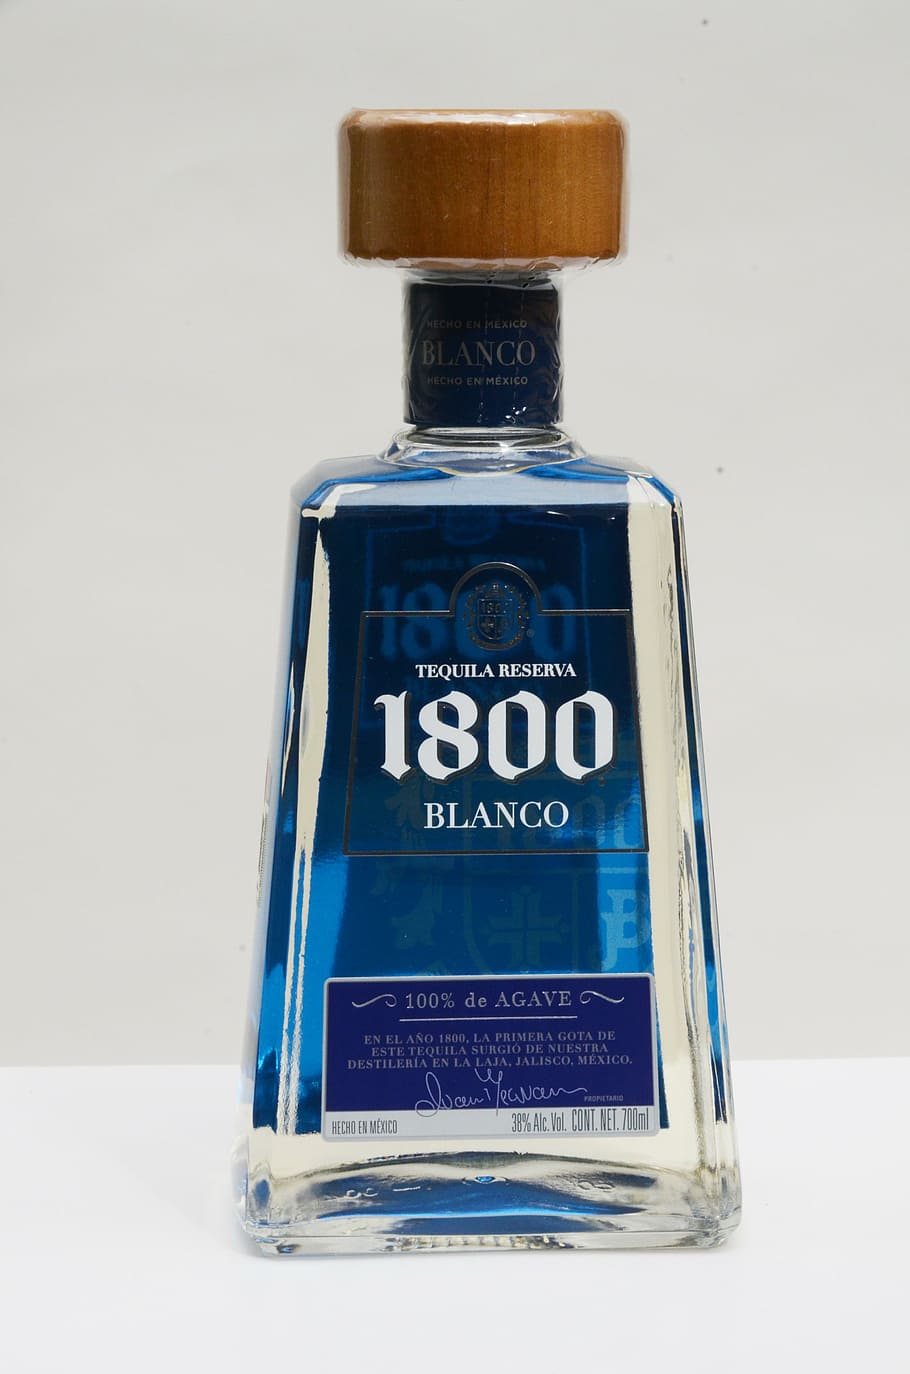 tequila 1800, white tequila, premium tequila, bottle, alcohol, drink, communication, text, blue, still life